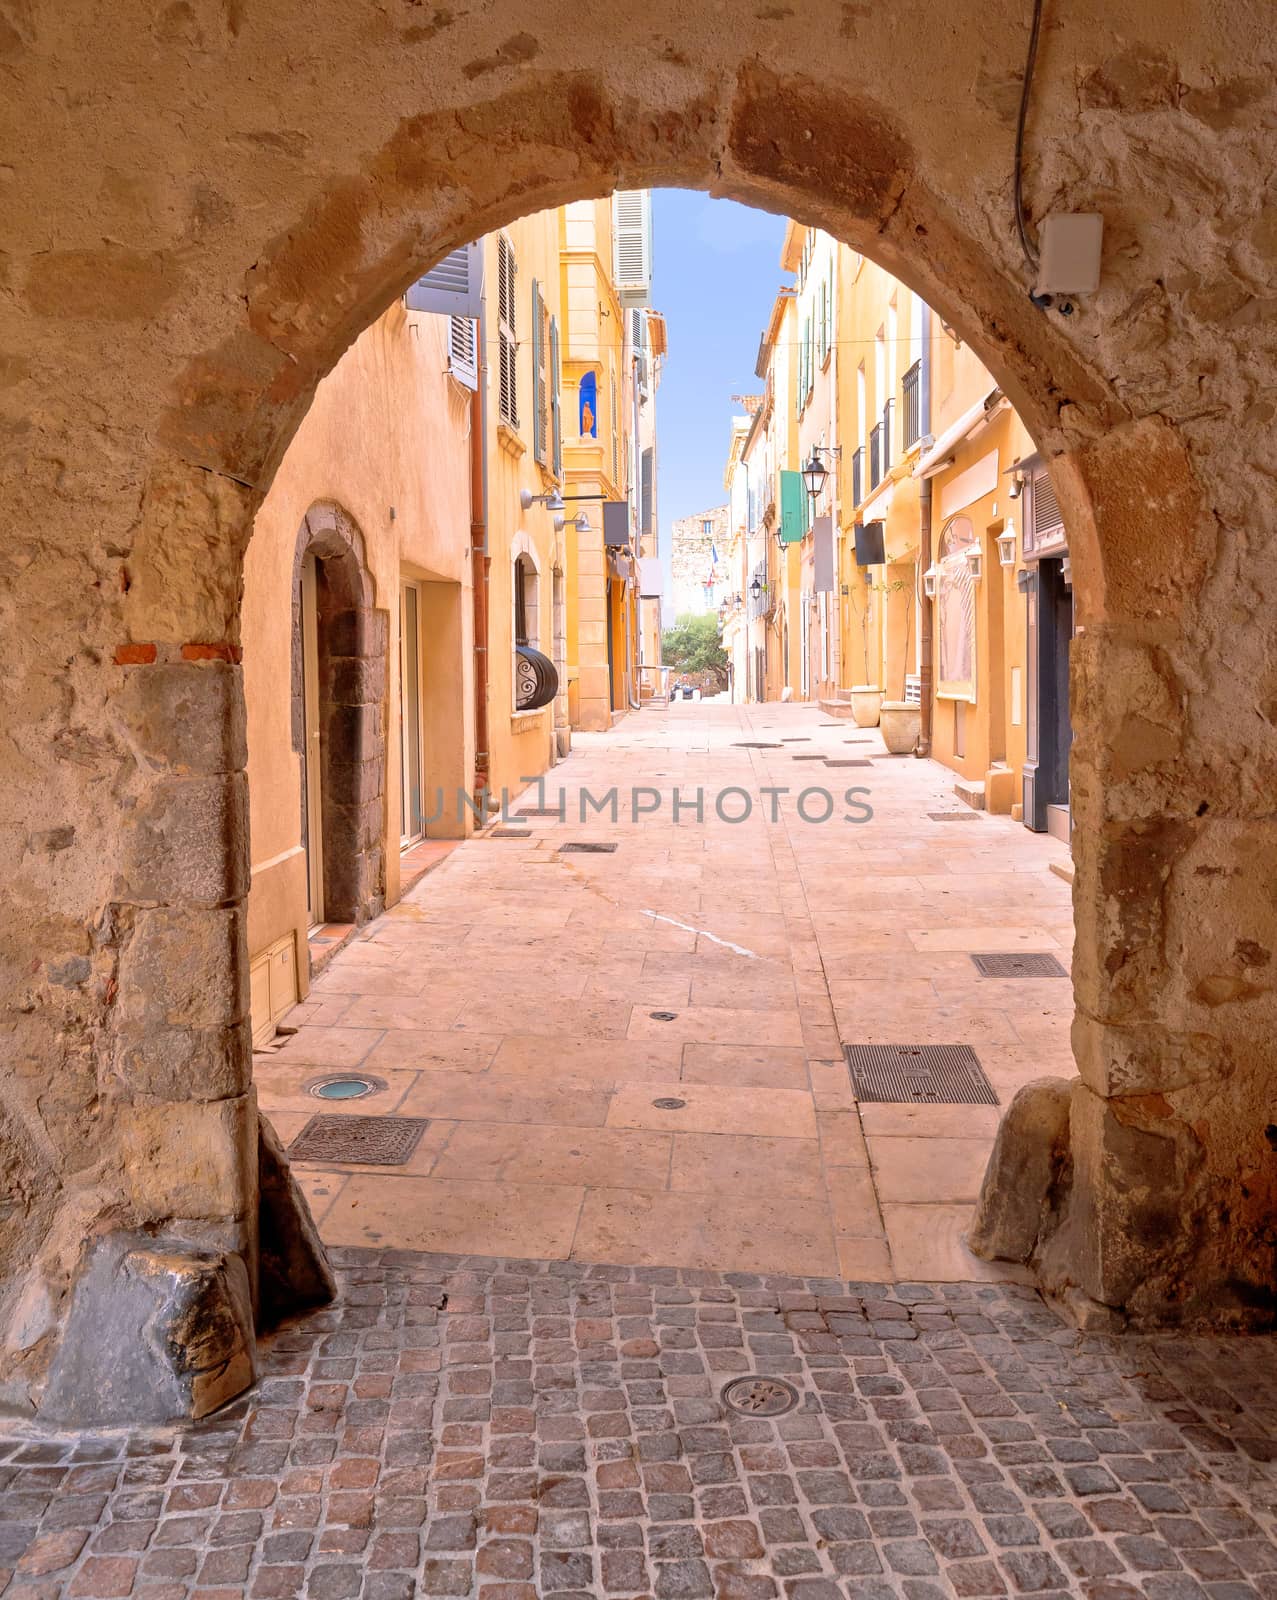 Saint Tropez historic town gate and colorful street view, tourist destination of French riviera